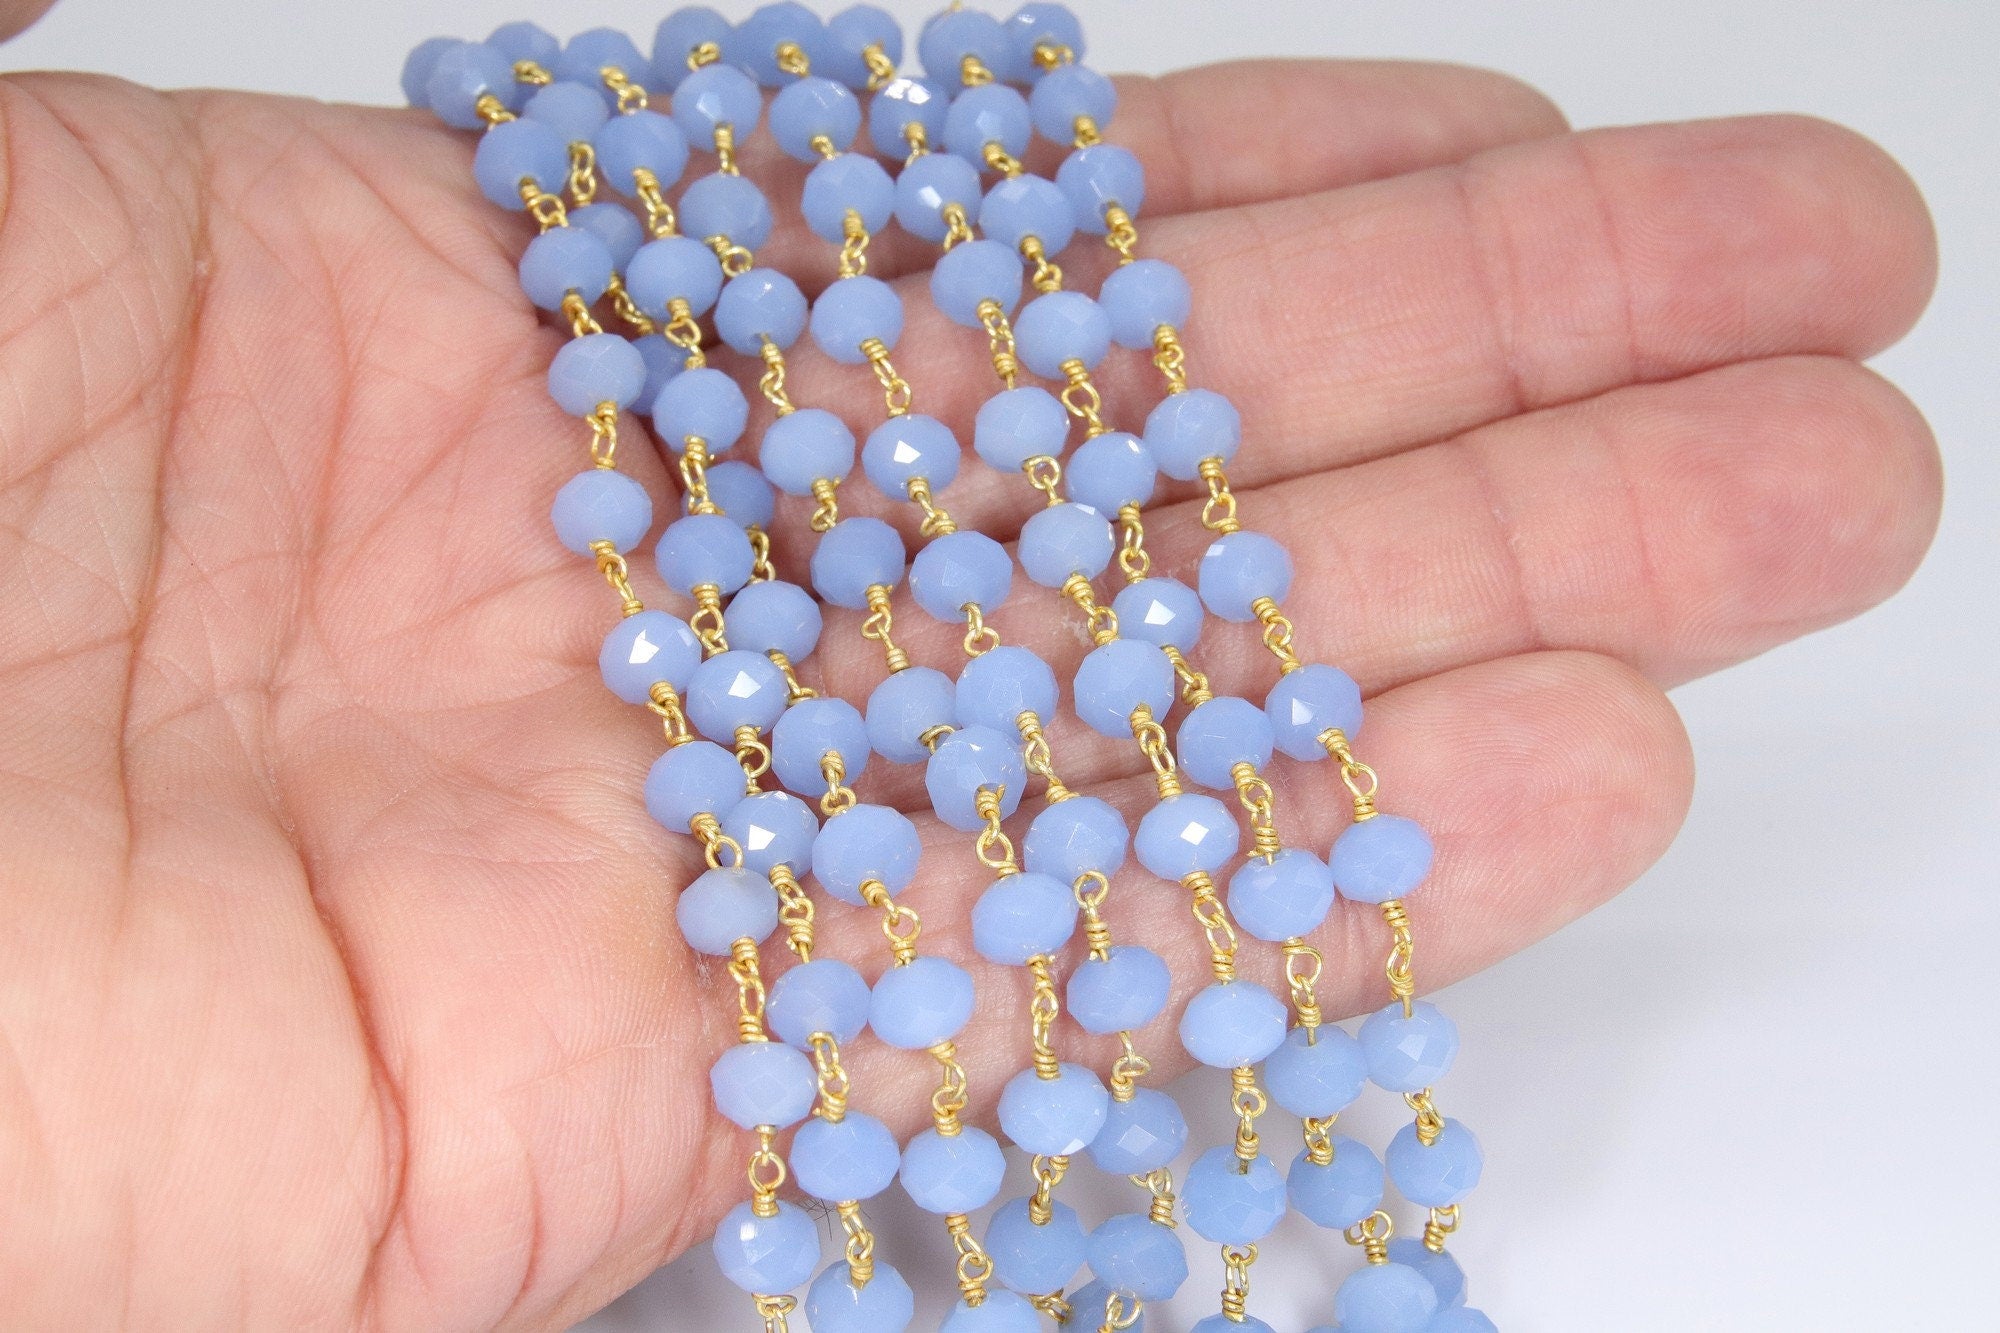 Baby Blue Chalcedony AB Rosary Chain, 6 mm Gold Wire Wrapped Crystal Jewelry Beads CH #513, Unfinished Bulk Wholesale Powder Blue Bead